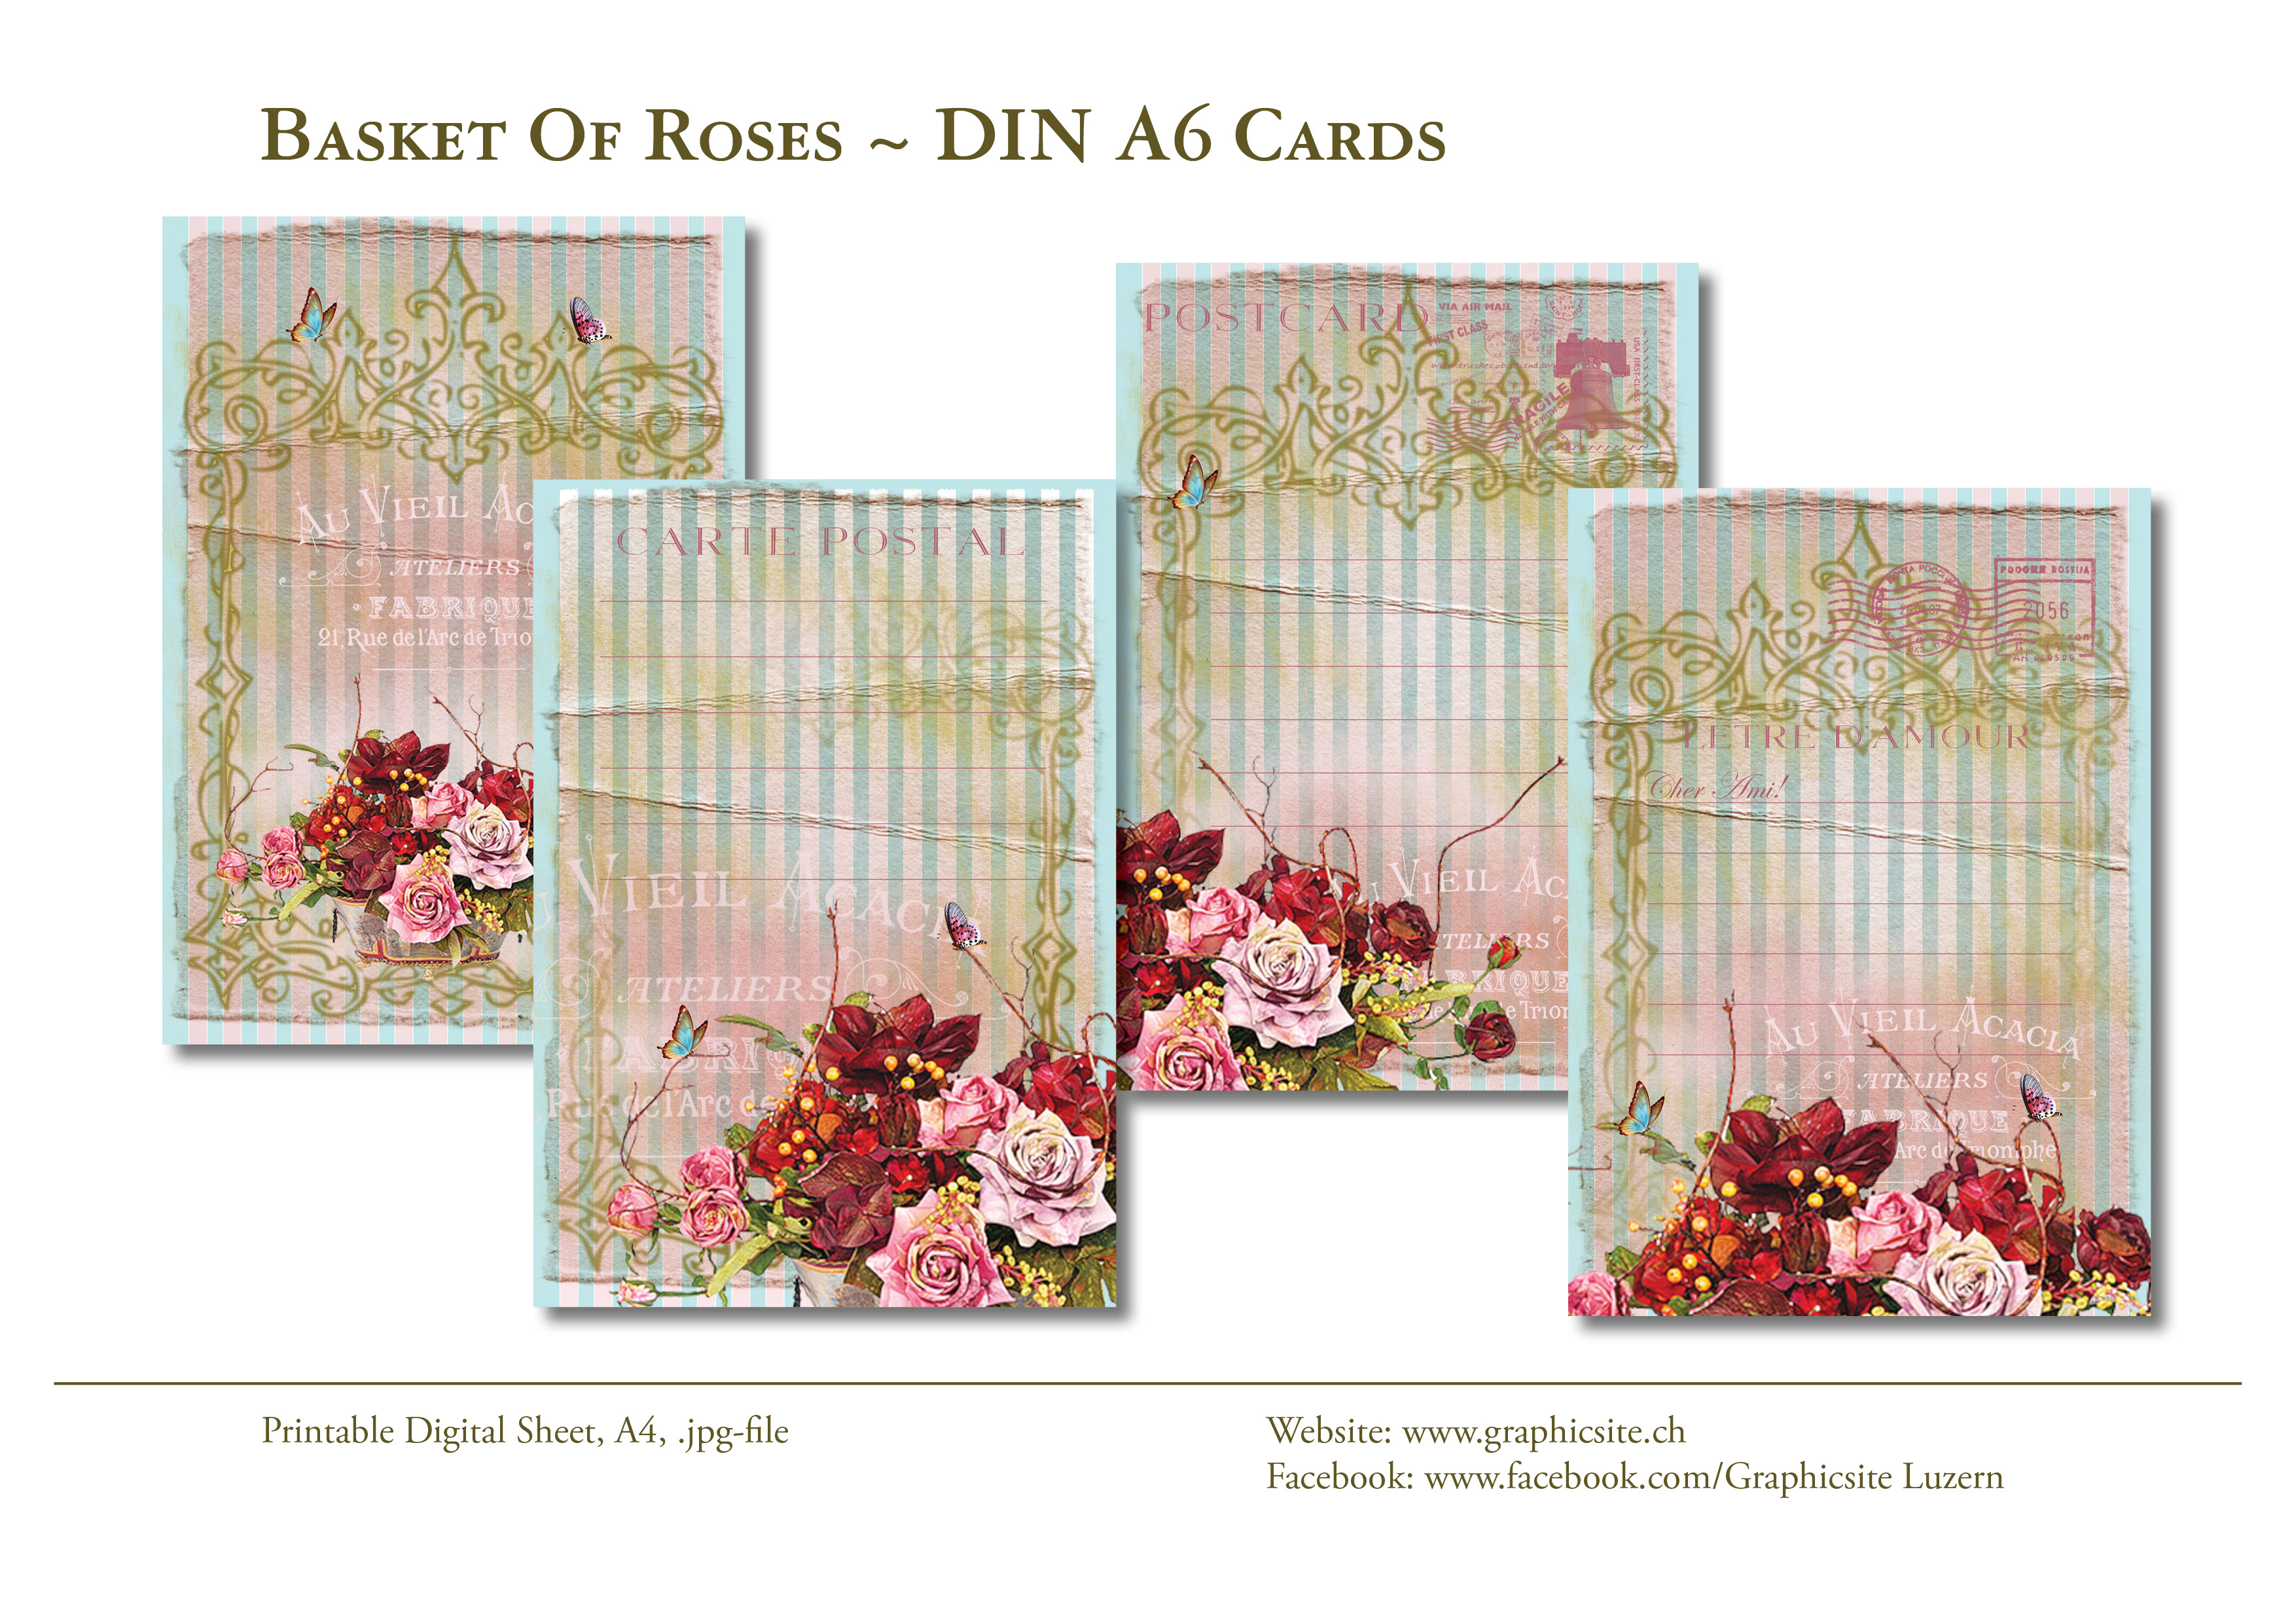 Printable Digital Sheets - DIN A-Formats - BasketOfRoses, #printable, #digital, #sheets, #cards, #greetingcards, #statiorary, #roses, #flowers, #floral, #ornament, #butterflies, #stripes, 